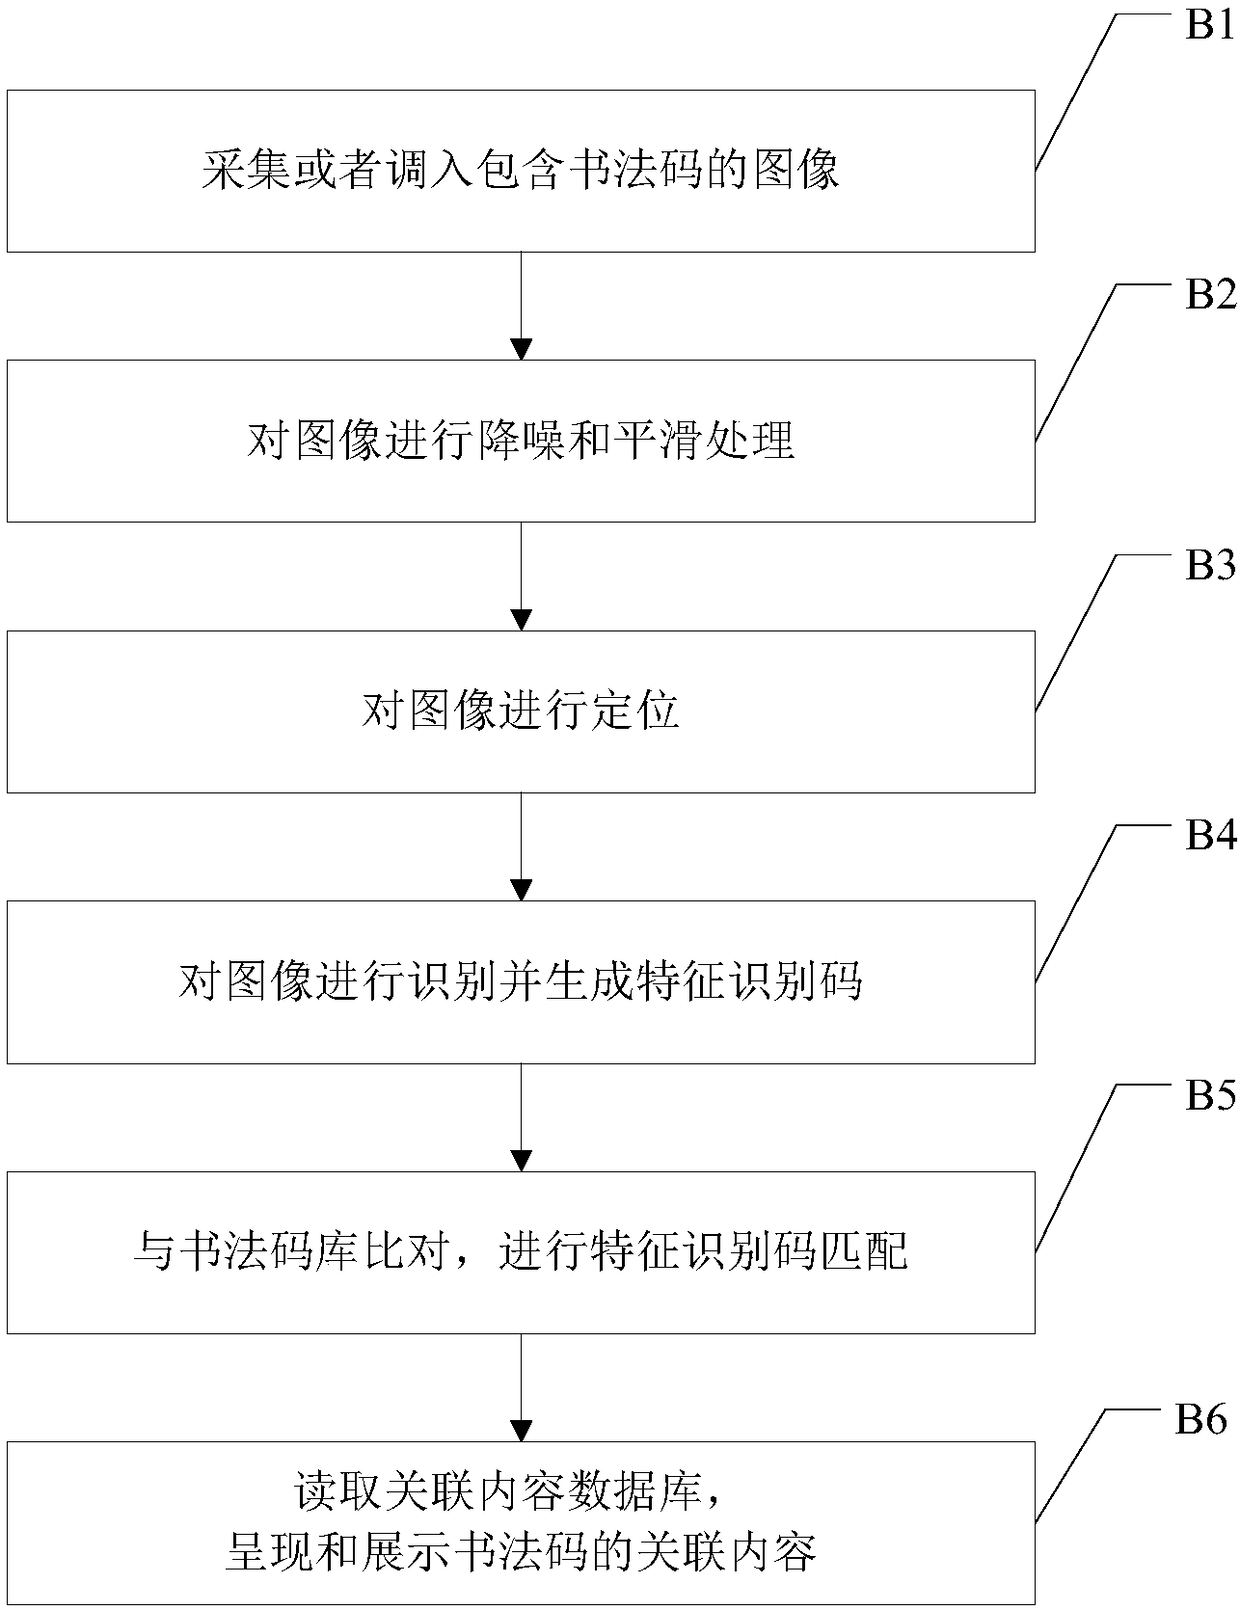 Calligraphy code generation method and system, analysis method and system, and calligraphy code label